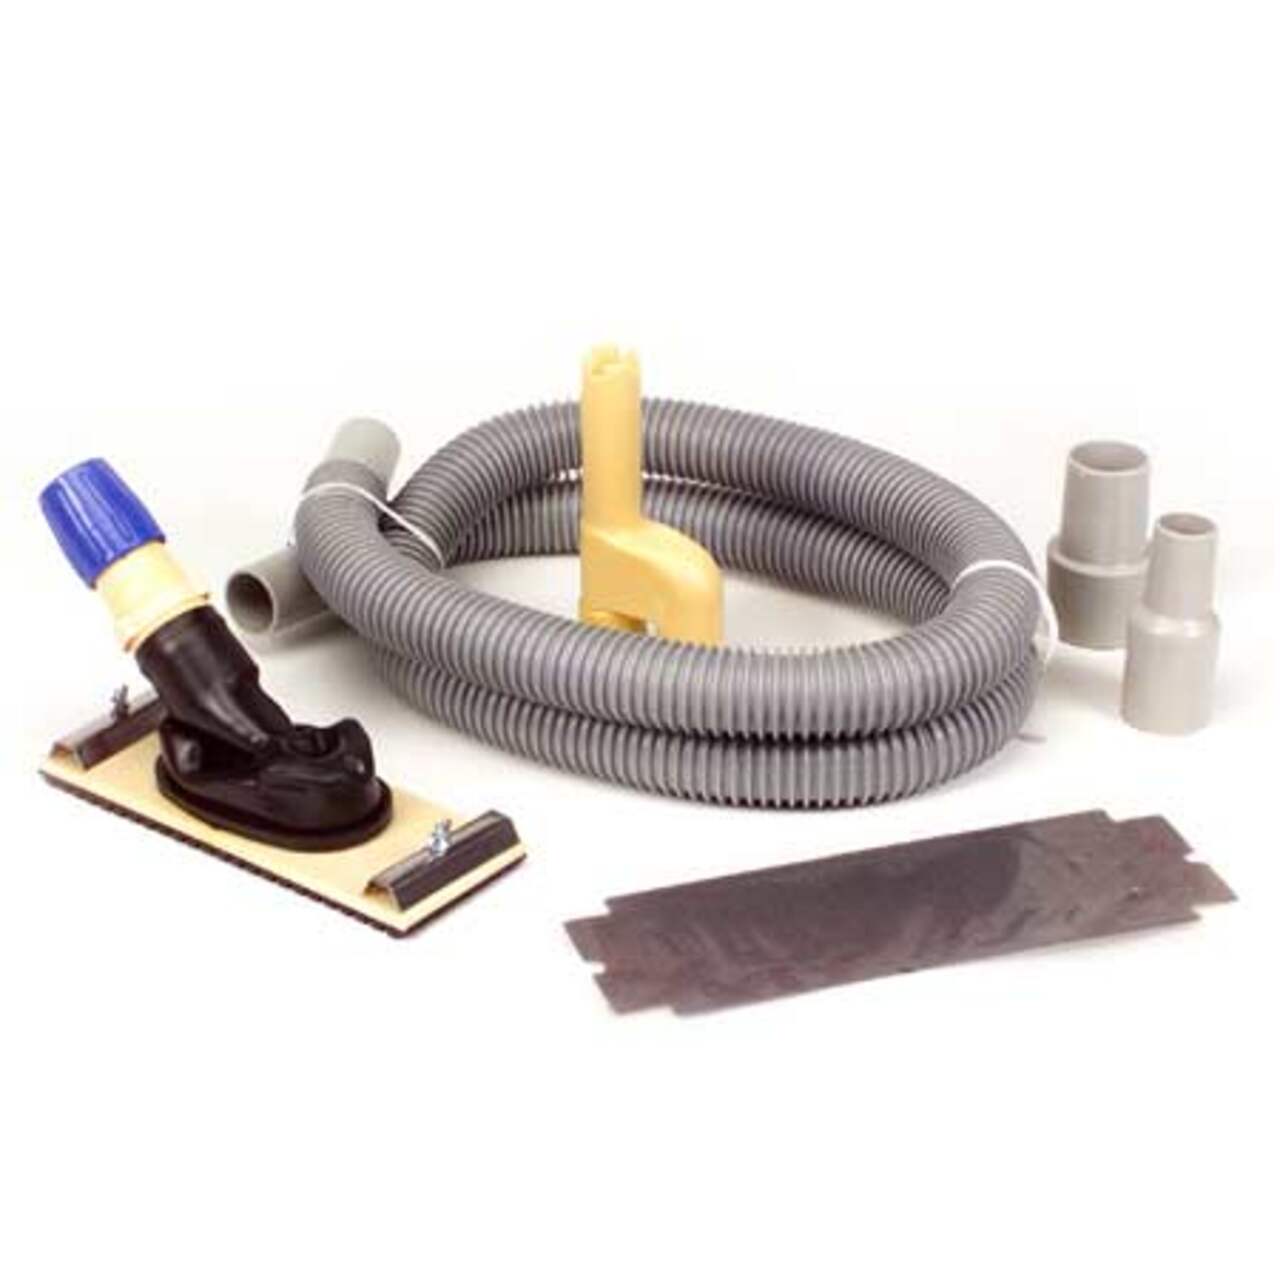 Woodworking Power Tool Dust Collection Hose Kit with Adapters and Hose Reel  - The Vacuum Factory